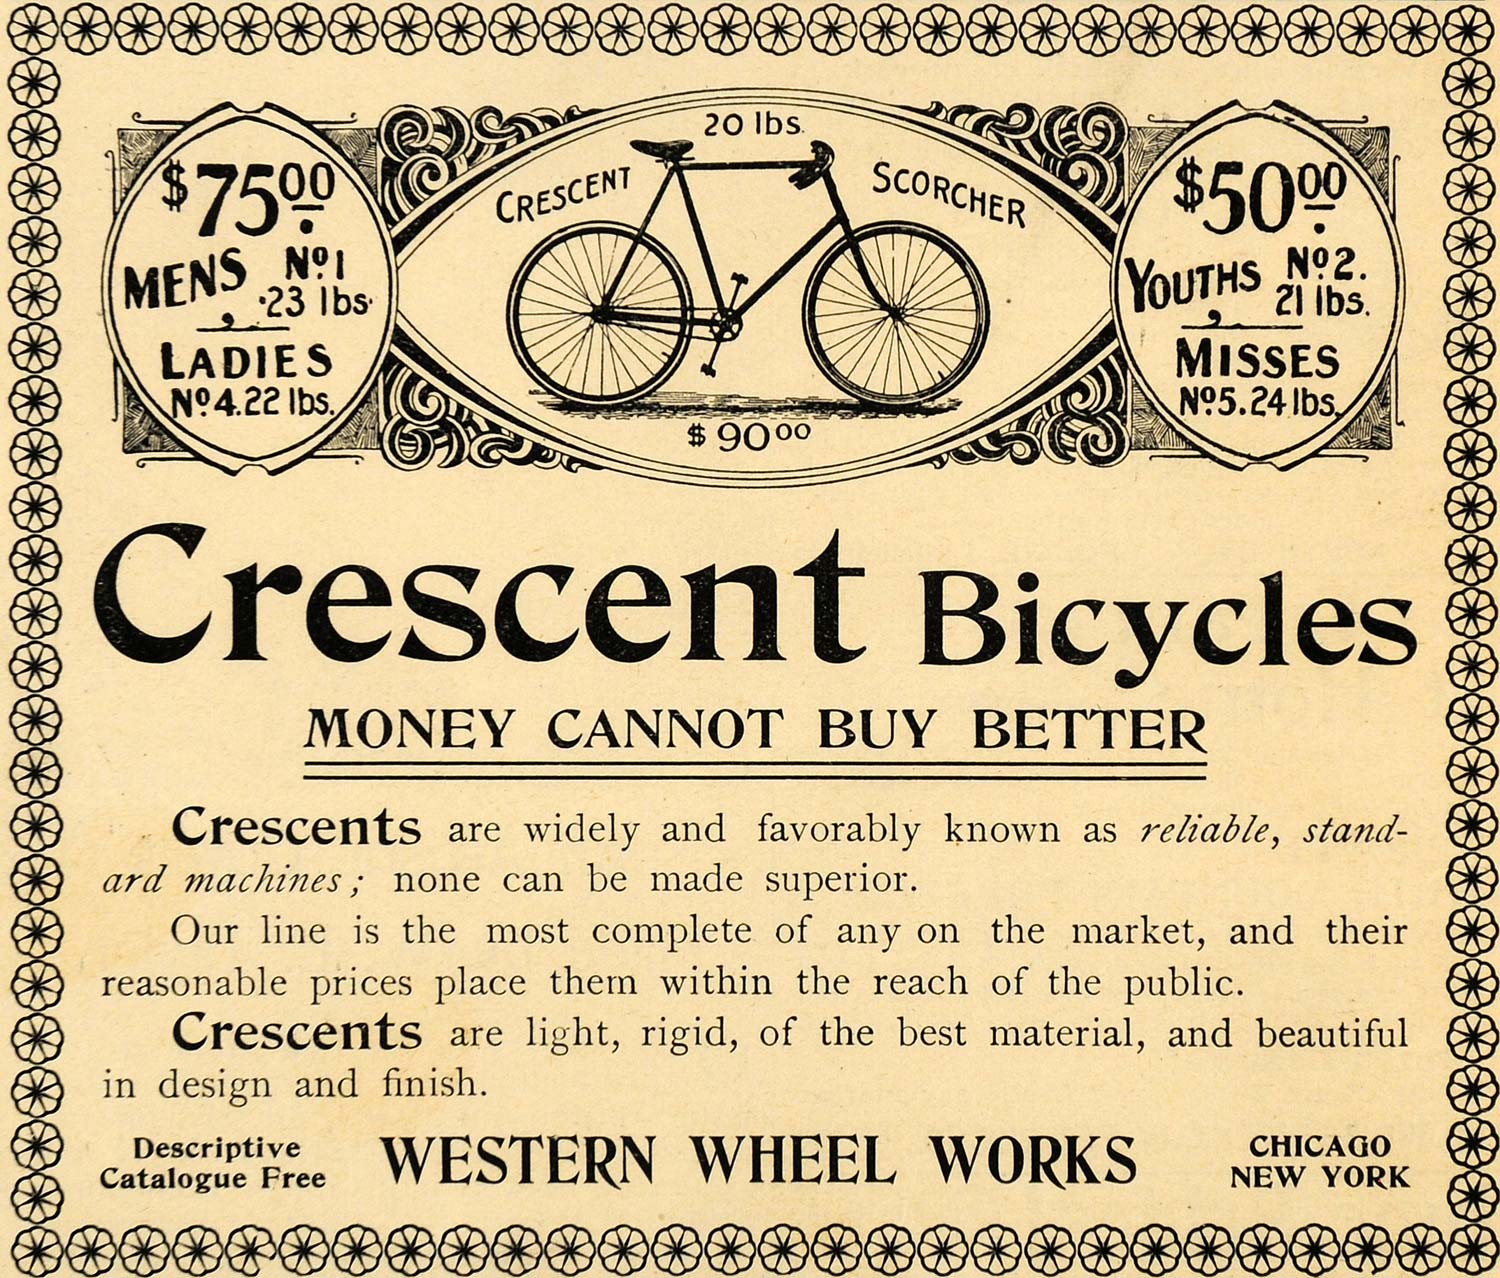 1895 Ad Crescent Bicycles Western Wheel Works Pricing - ORIGINAL LHJ3